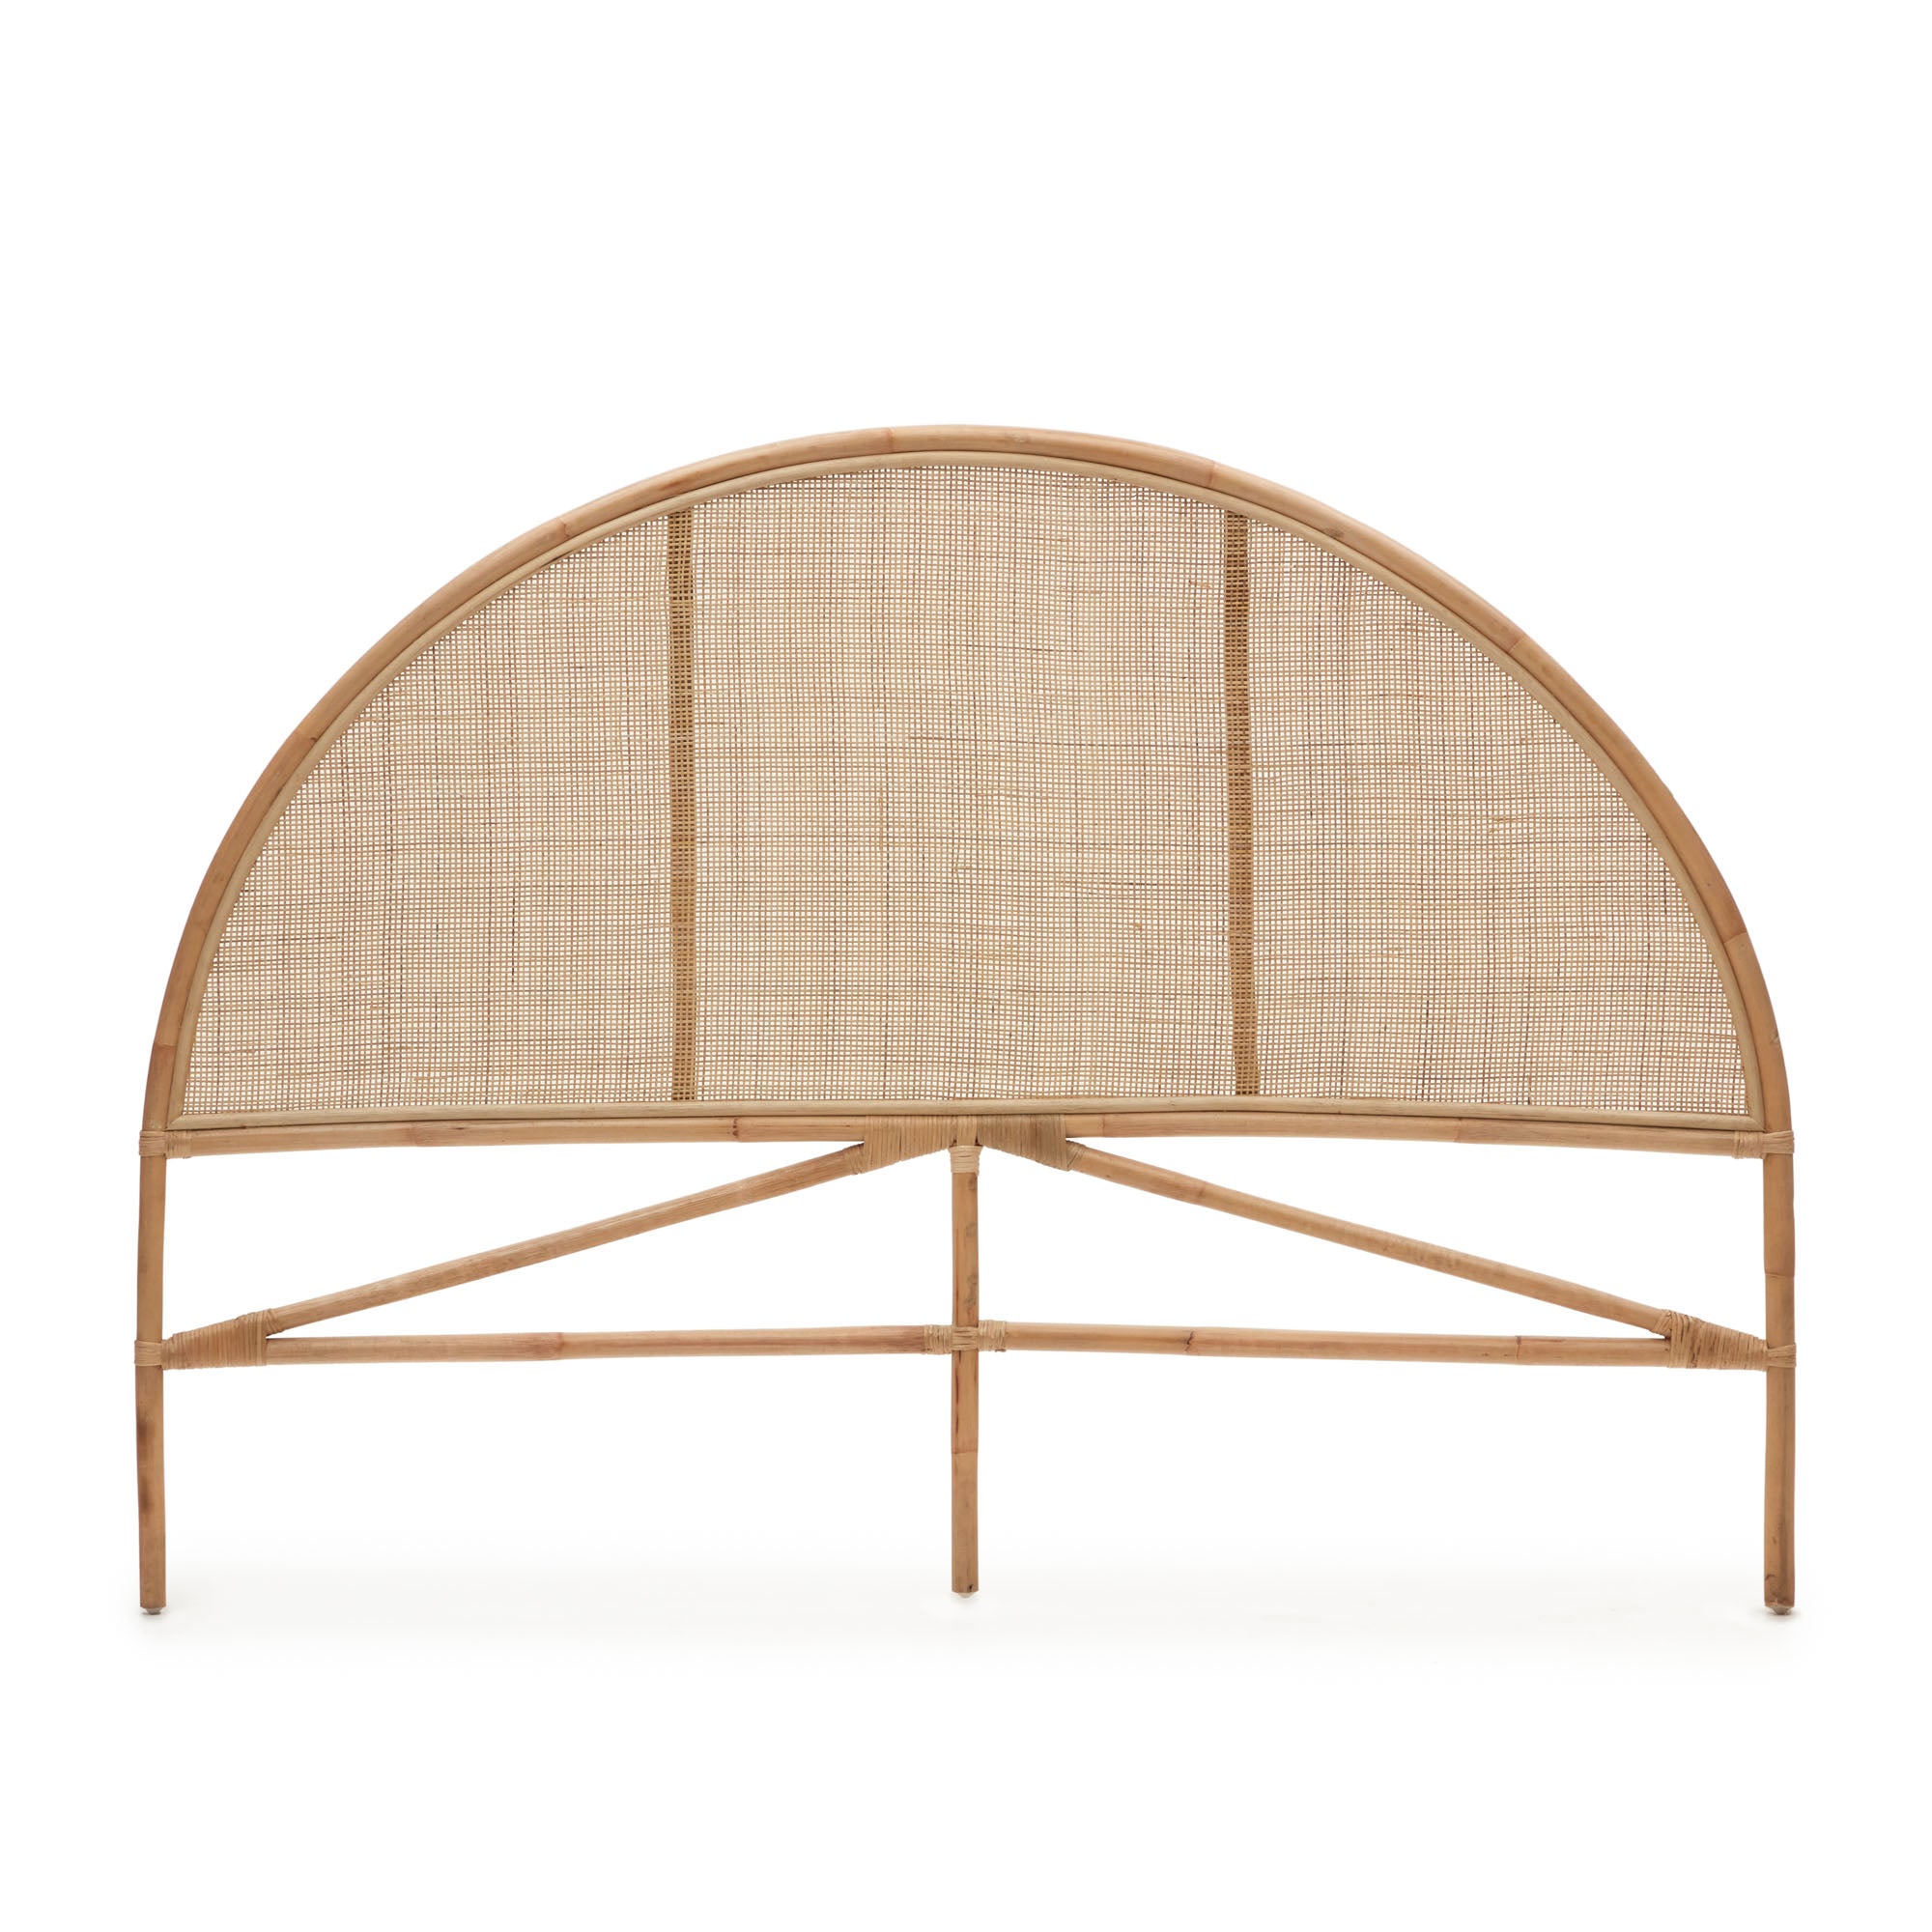 Quiterie round rattan headboard with a natural finish, 150/160 cm